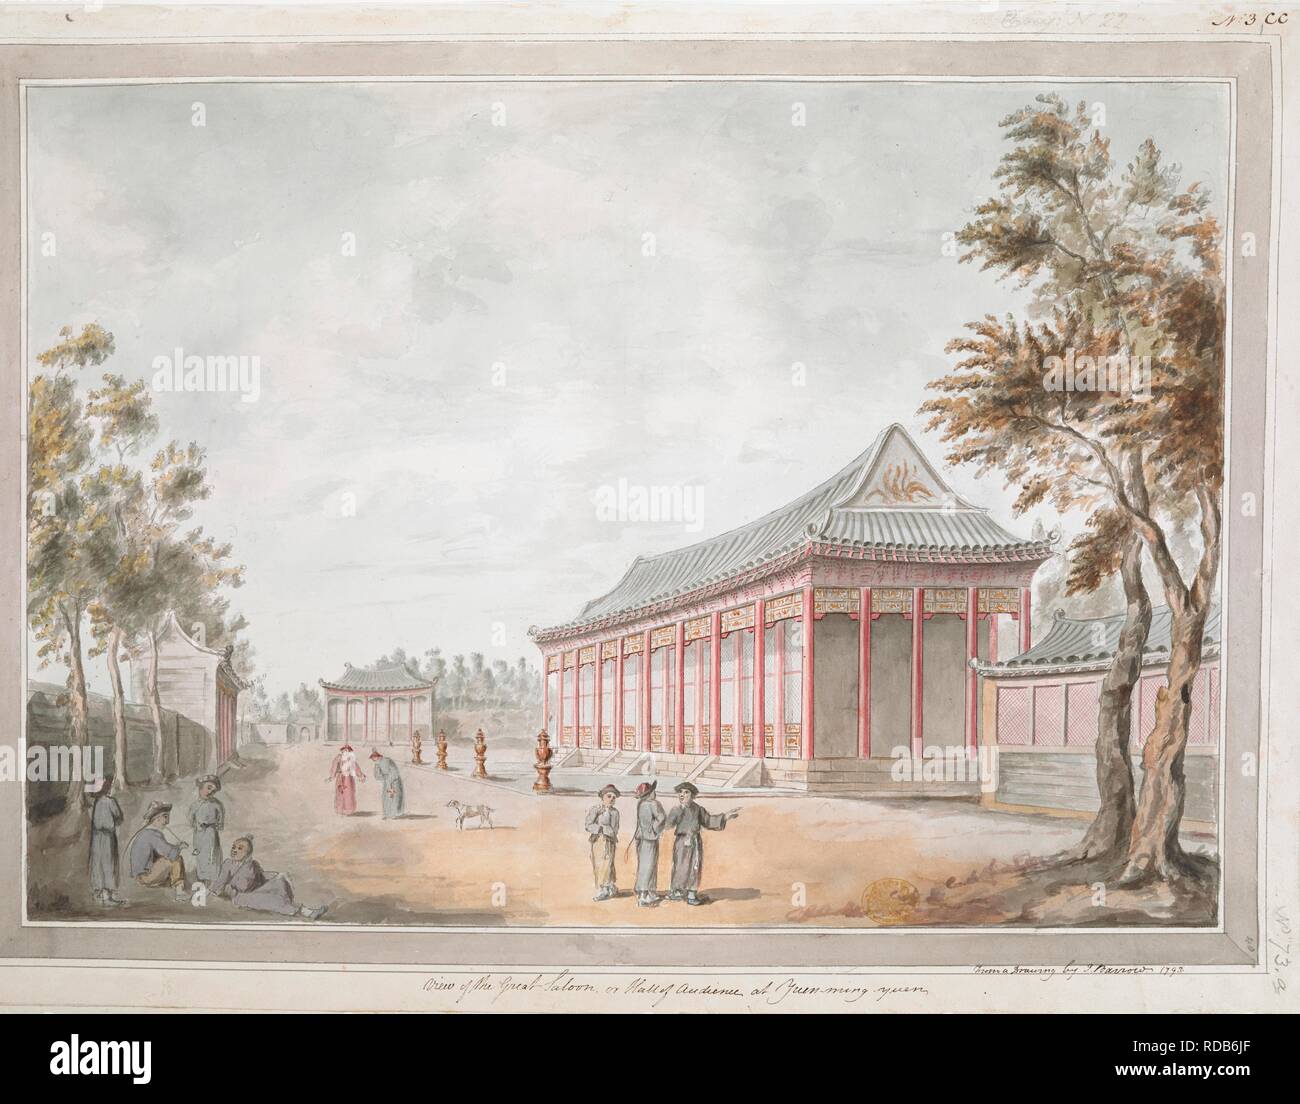 View of the Great Saloon, or Hall of Audience at Yuen-ming-yuen / From a drawing by J. Barrow. 1793. Groups of Chinese men in conversation under the trees by a road in the foreground, with the porticoed great hall of audience of the palace of Yuen-ming-yuen on the right, within washlines.   . A collection of eighty views, maps, portraits and drawings illustrative of the Embassy sent to China under George, Earl of Macartney, in 1793; drawn chiefly by William Alexander, some by Sir John Barrow, Bart., some by Sir Henry Woodbine Parish, and one by William Gomm. Many of them are engraved in Sir Ge Stock Photo